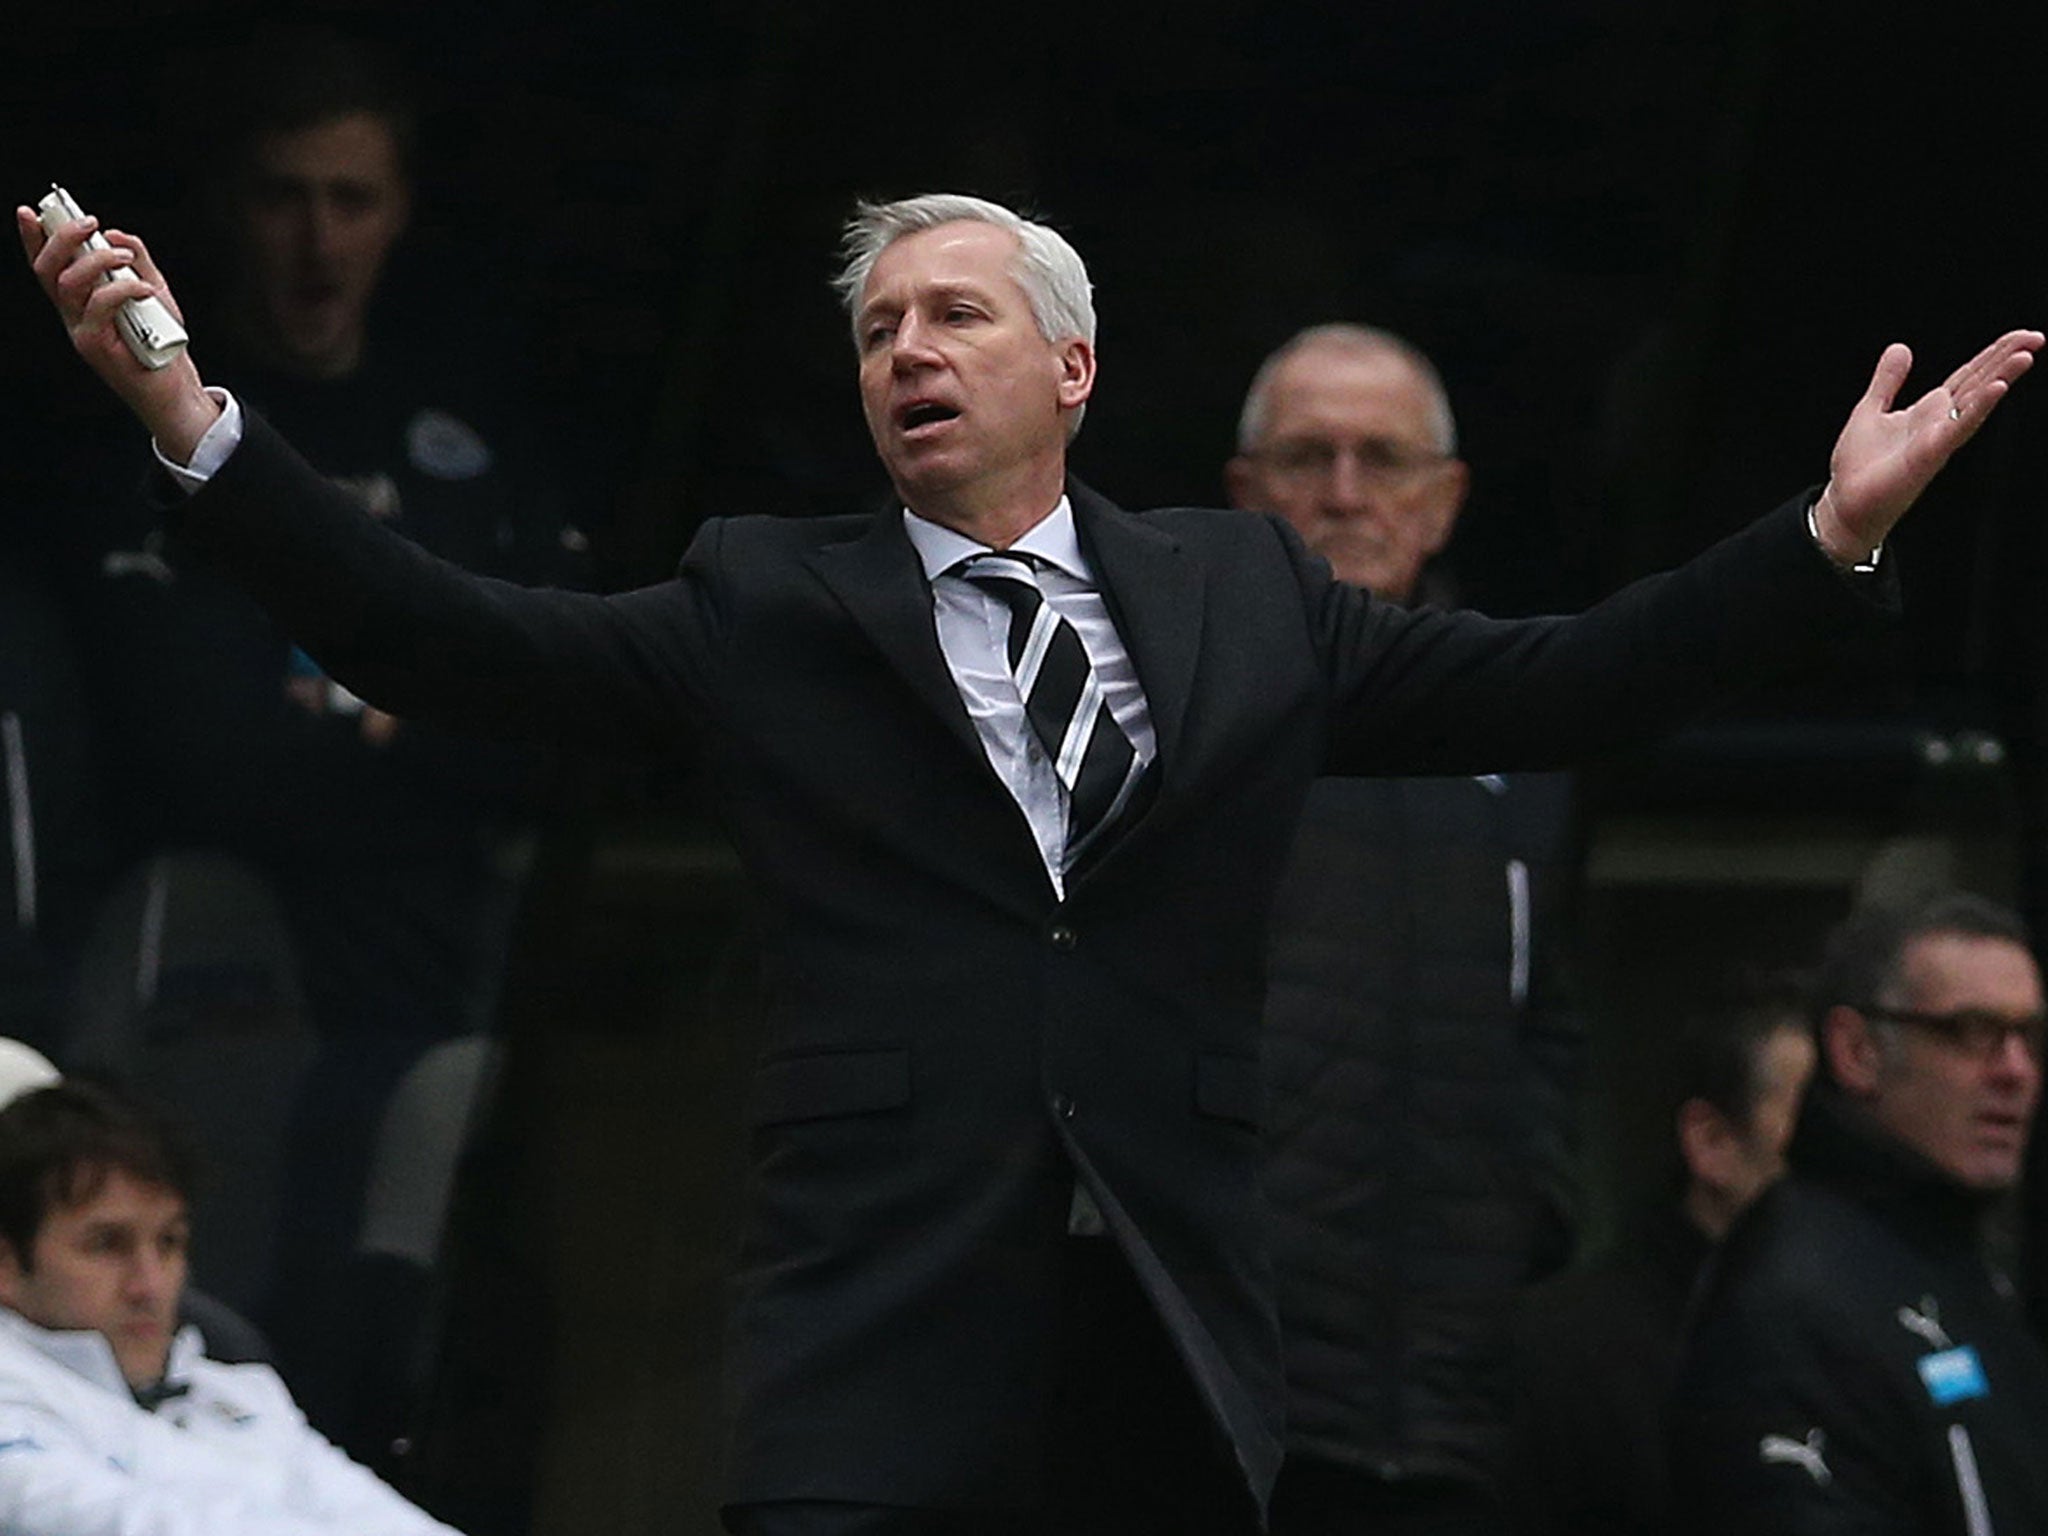 Alan Pardew is left furious and bemused as Cheik Tiote's goal is ruled out for offside during Newcastle's 2-0 defeat to Manchester City